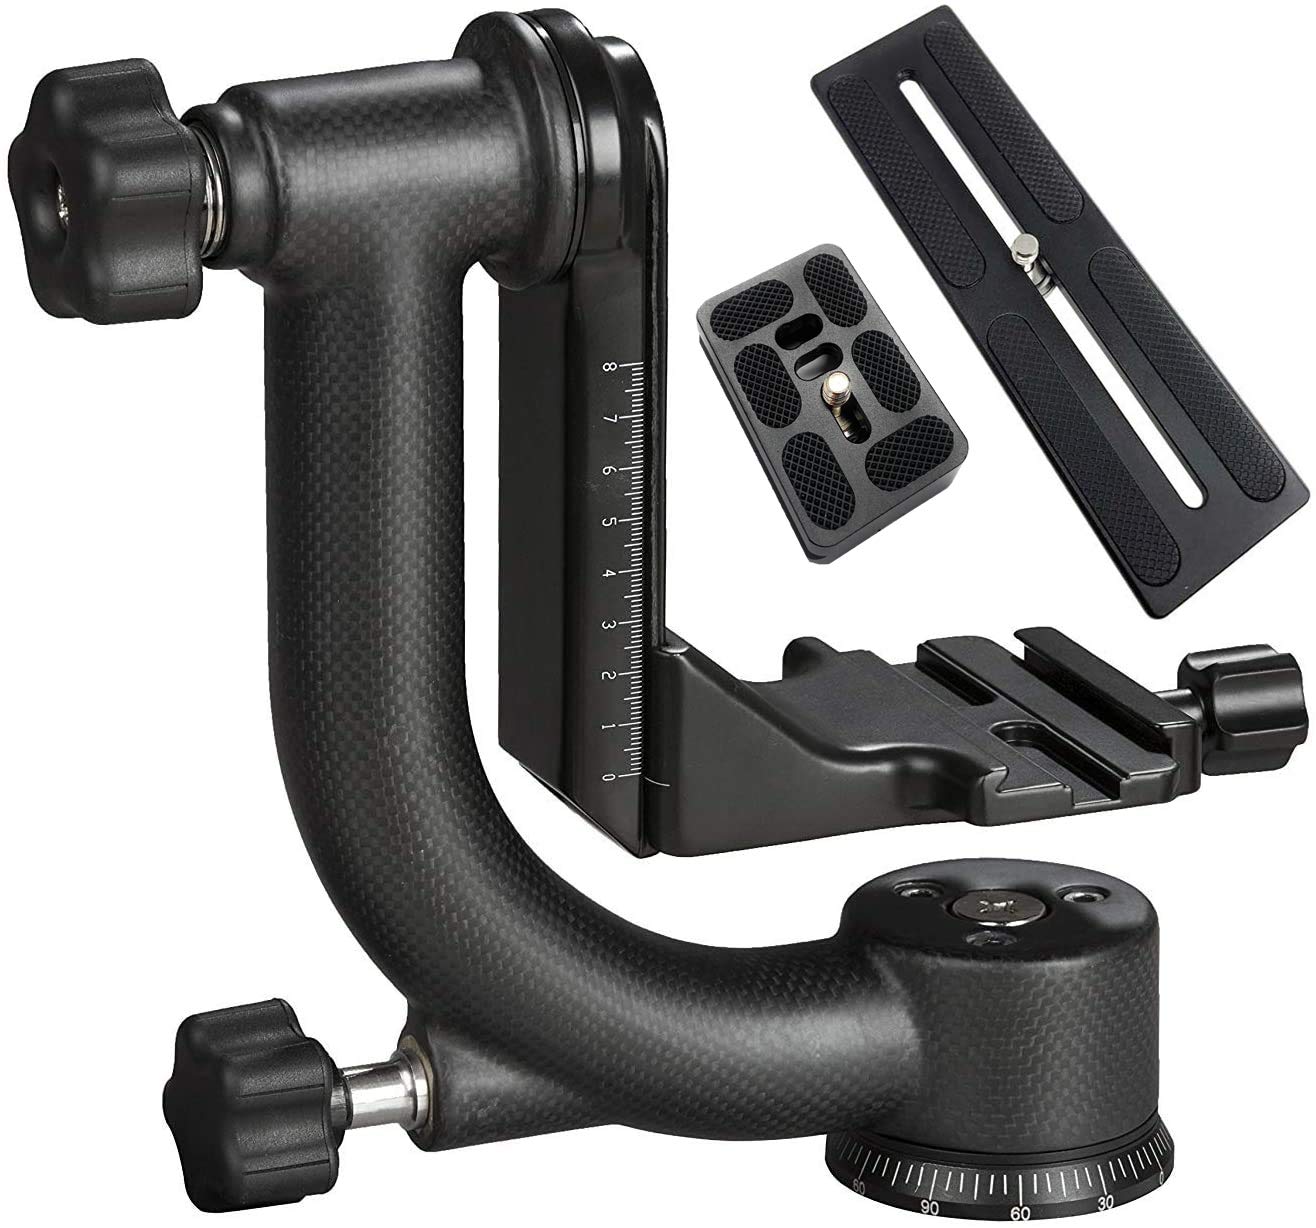 Movo GH800 MKII Carbon Fiber Professional Gimbal Tripod Head with Long and Short Arca-Swiss Quick-Release Plates - for Outdoor Bird/Wildlife Photography  - Good